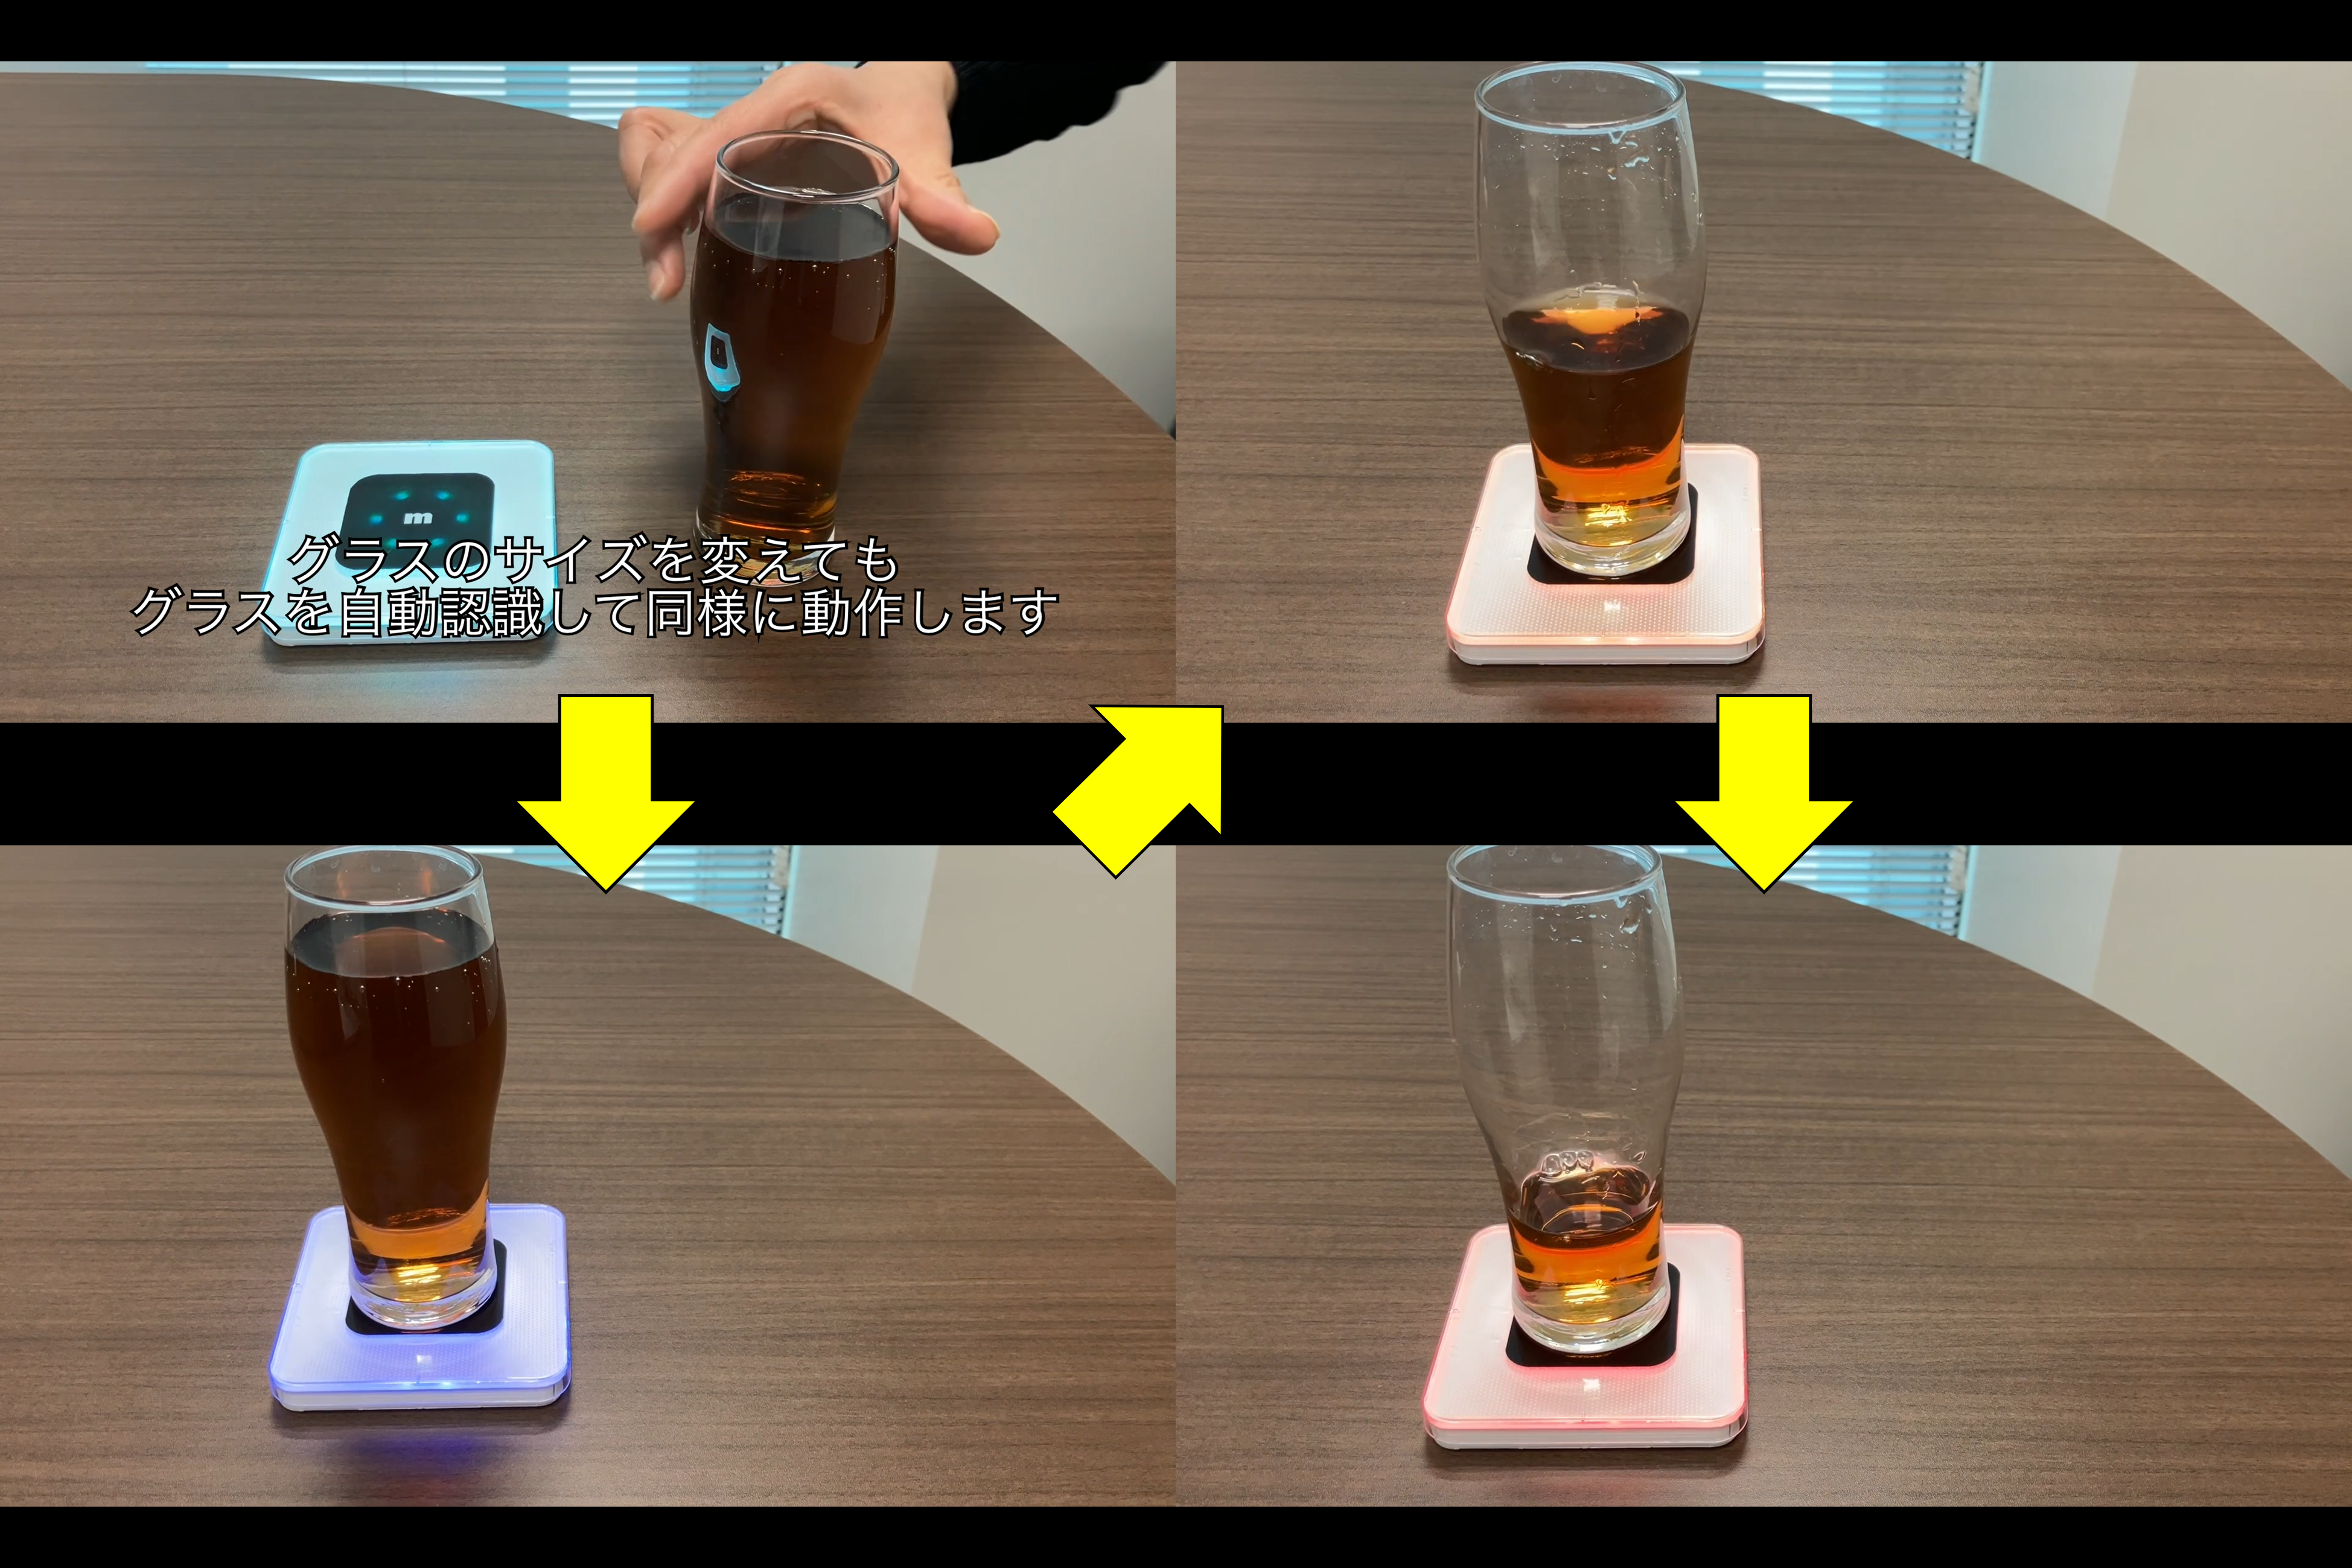 Detects remaining drink amount with weight sensor